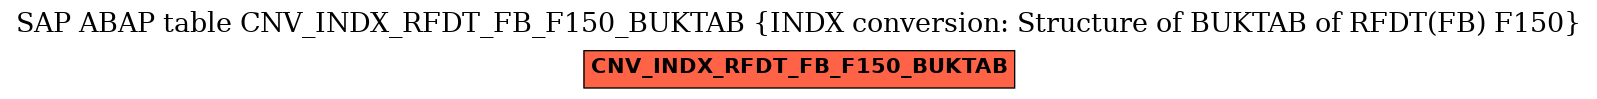 E-R Diagram for table CNV_INDX_RFDT_FB_F150_BUKTAB (INDX conversion: Structure of BUKTAB of RFDT(FB) F150)